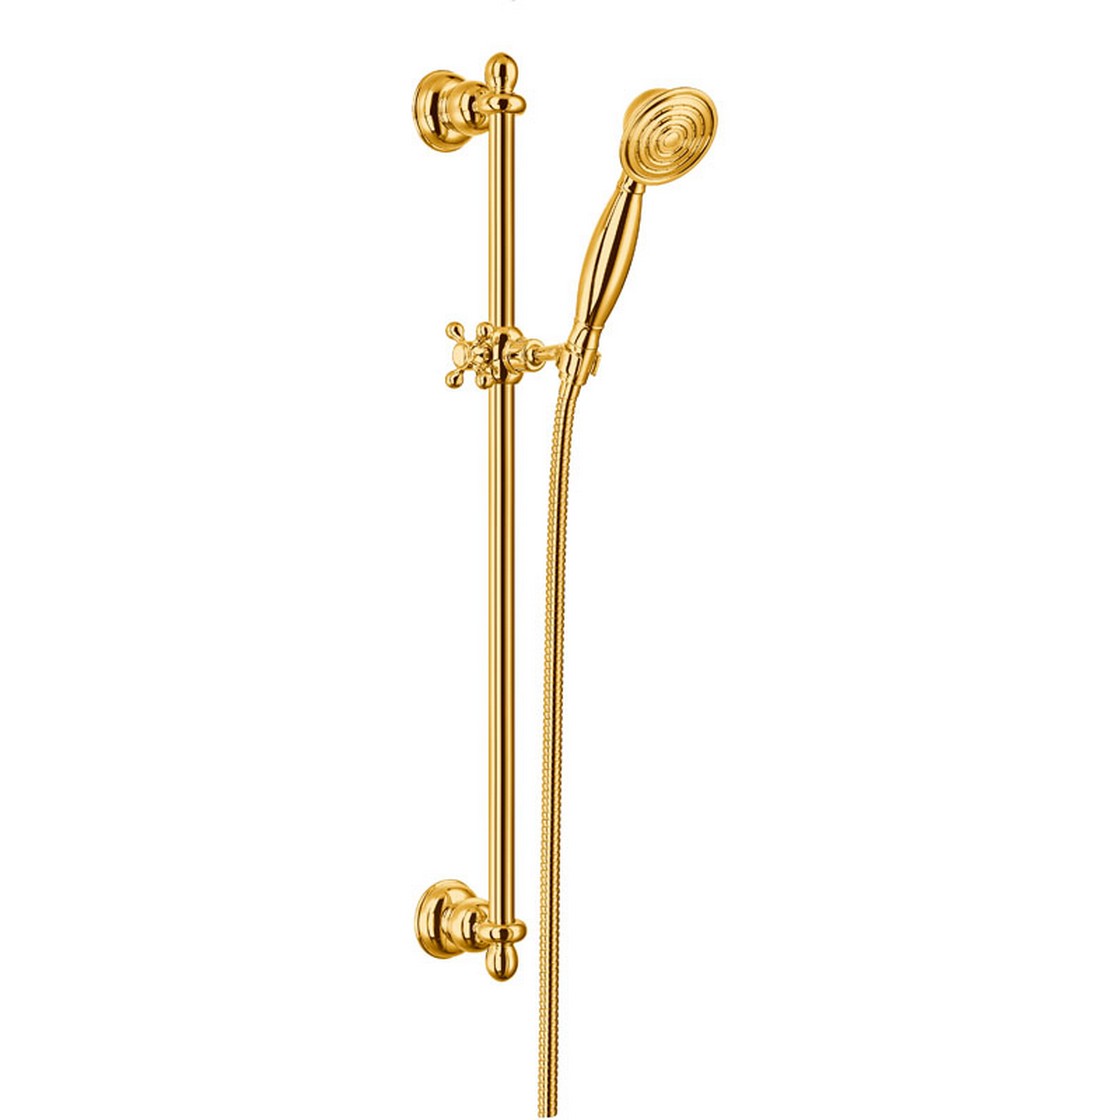 Shower bar with shower kit COLORADO GOLD 1017.233-G